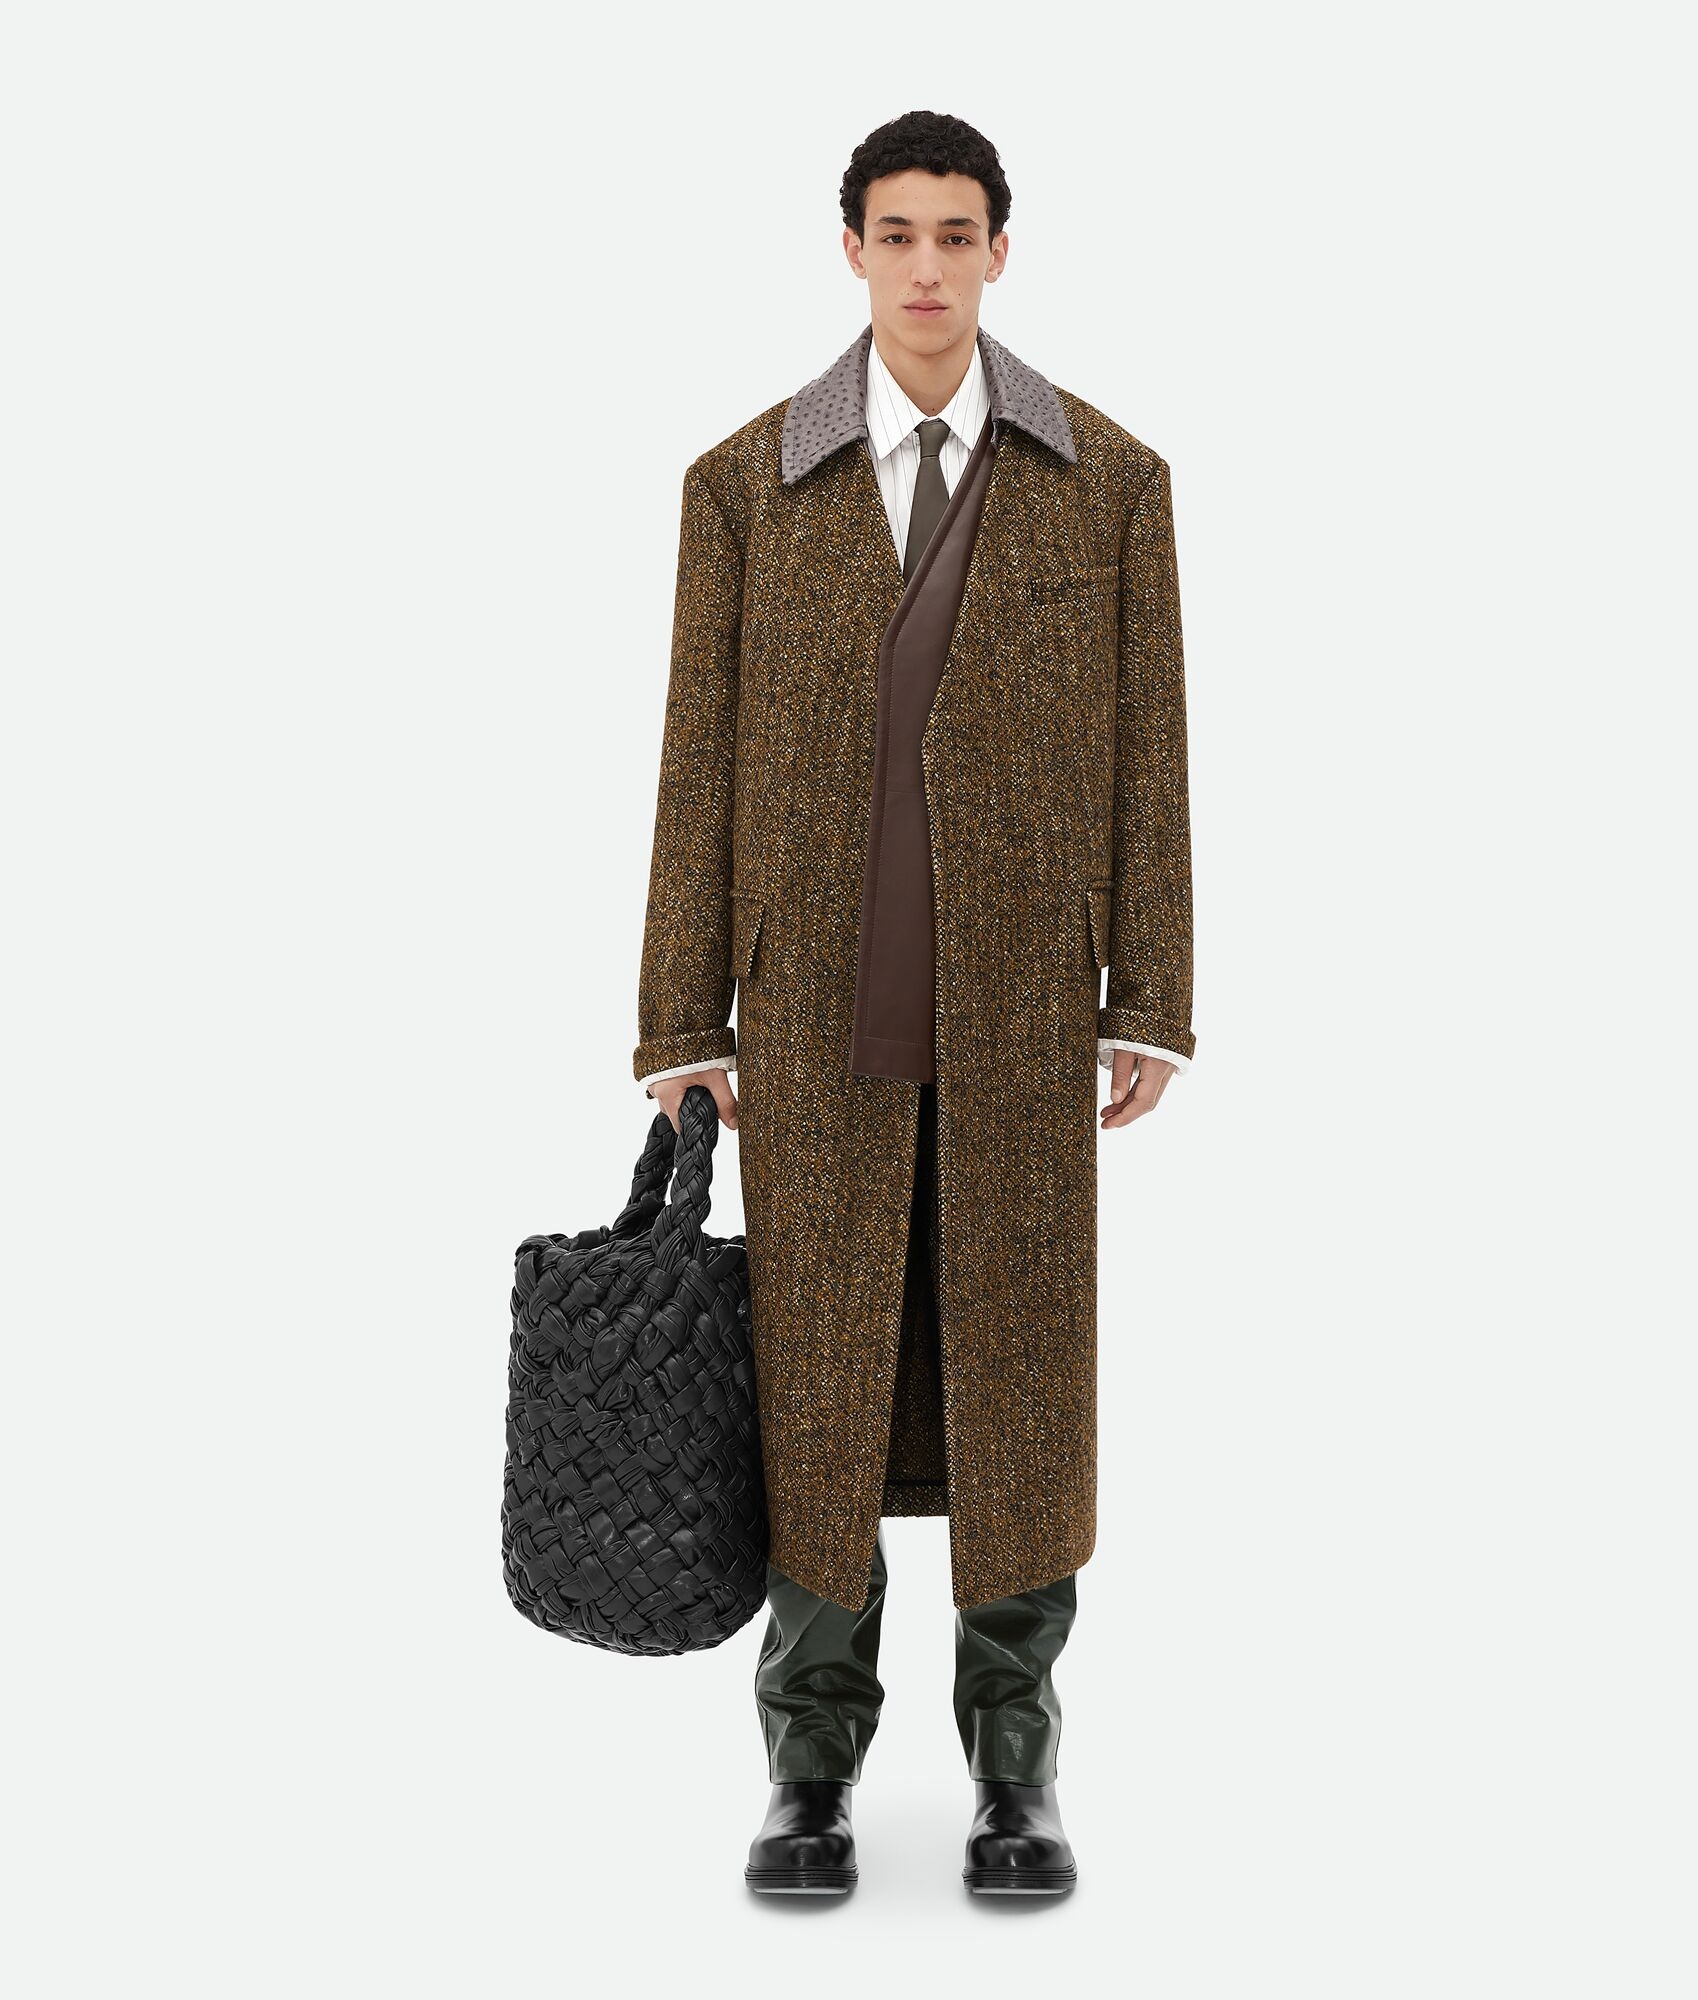 Textured Wool Speckled Coat With Leather Collar - 5